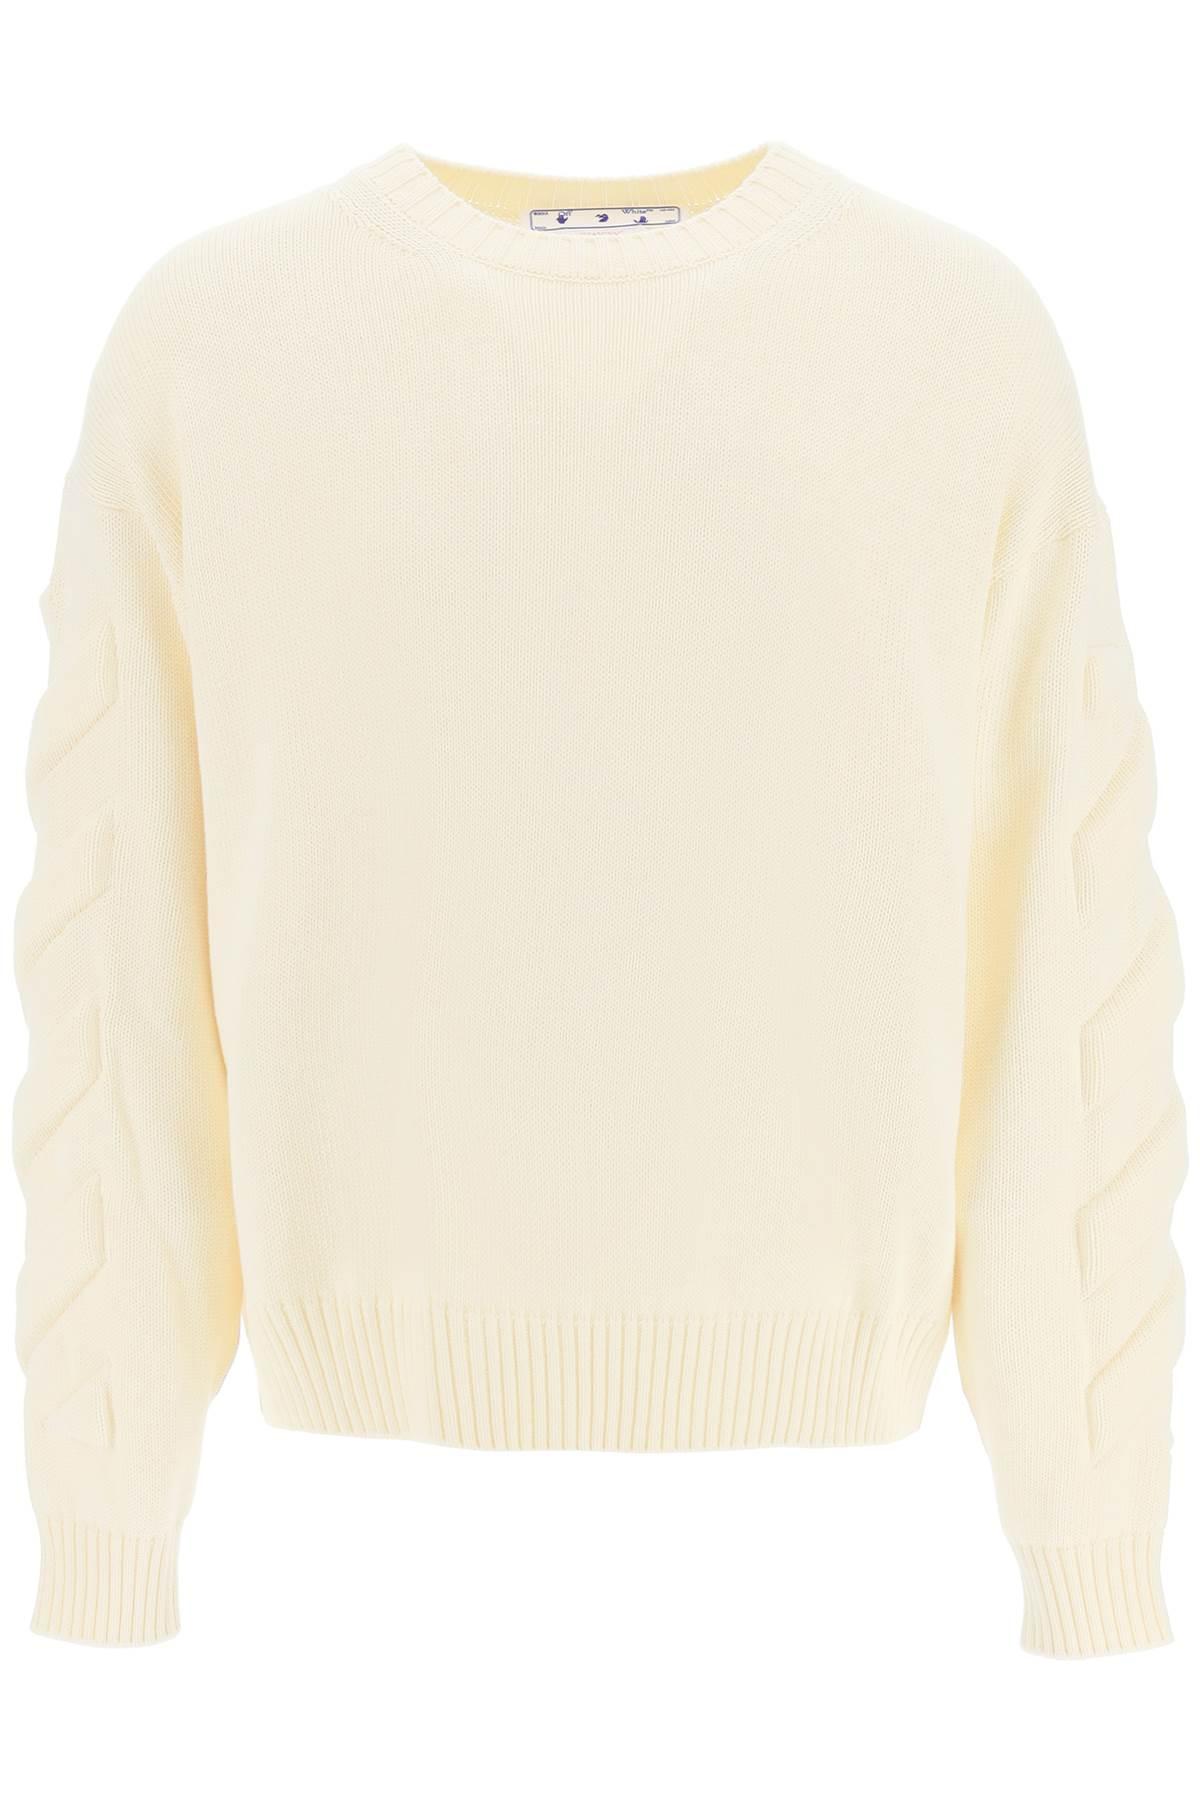 OFF-WHITE CREW-NECK PULLOVER WITH PADDED DETAILS